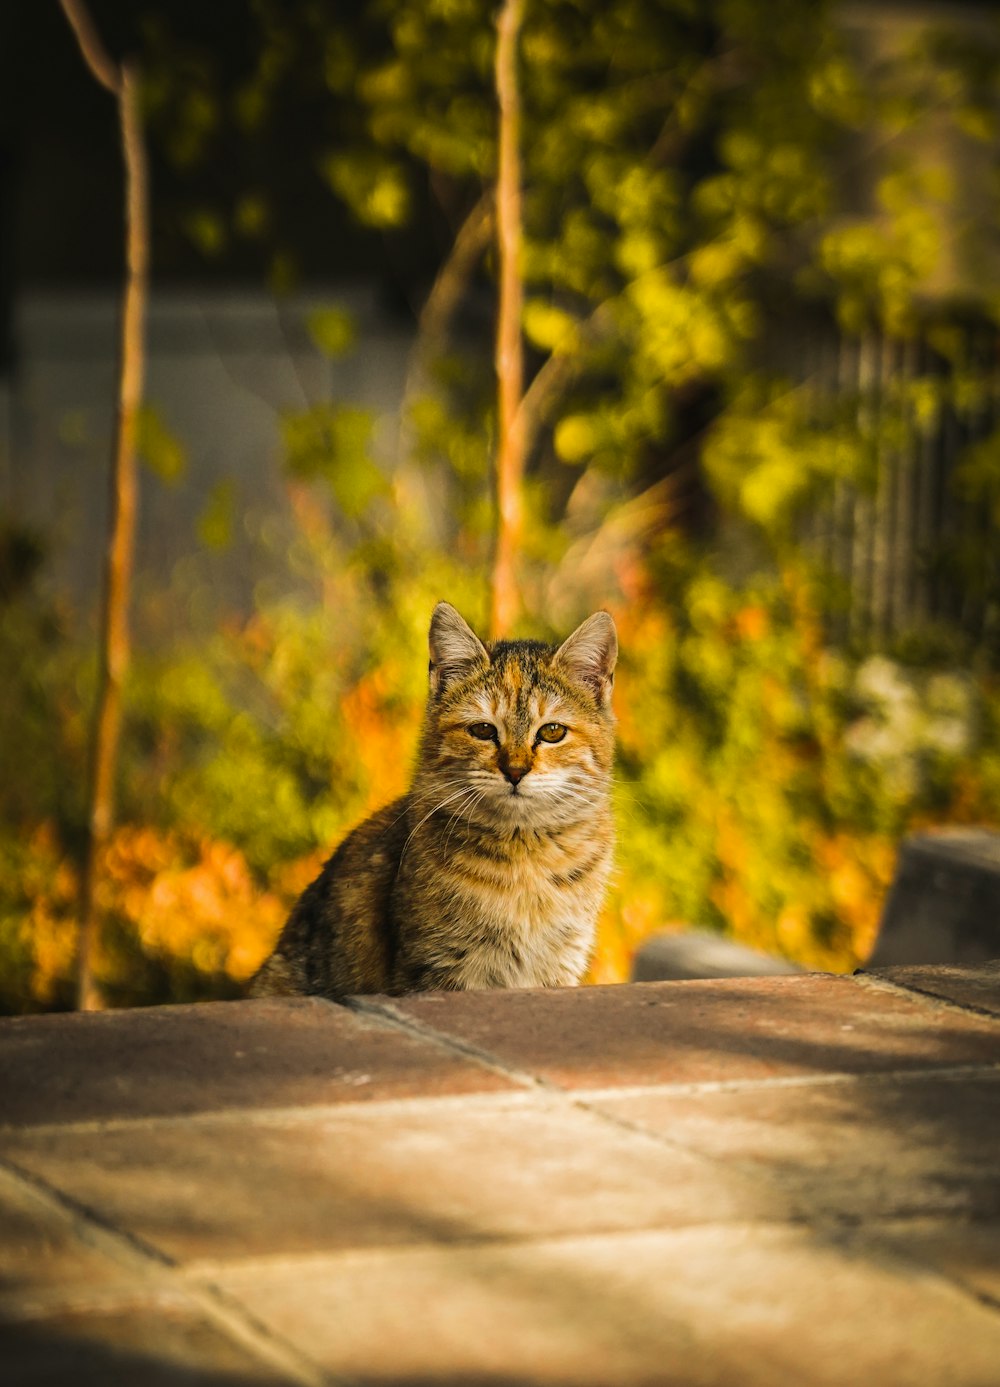 brown tabby cat sitting on brown concrete surface during daytime